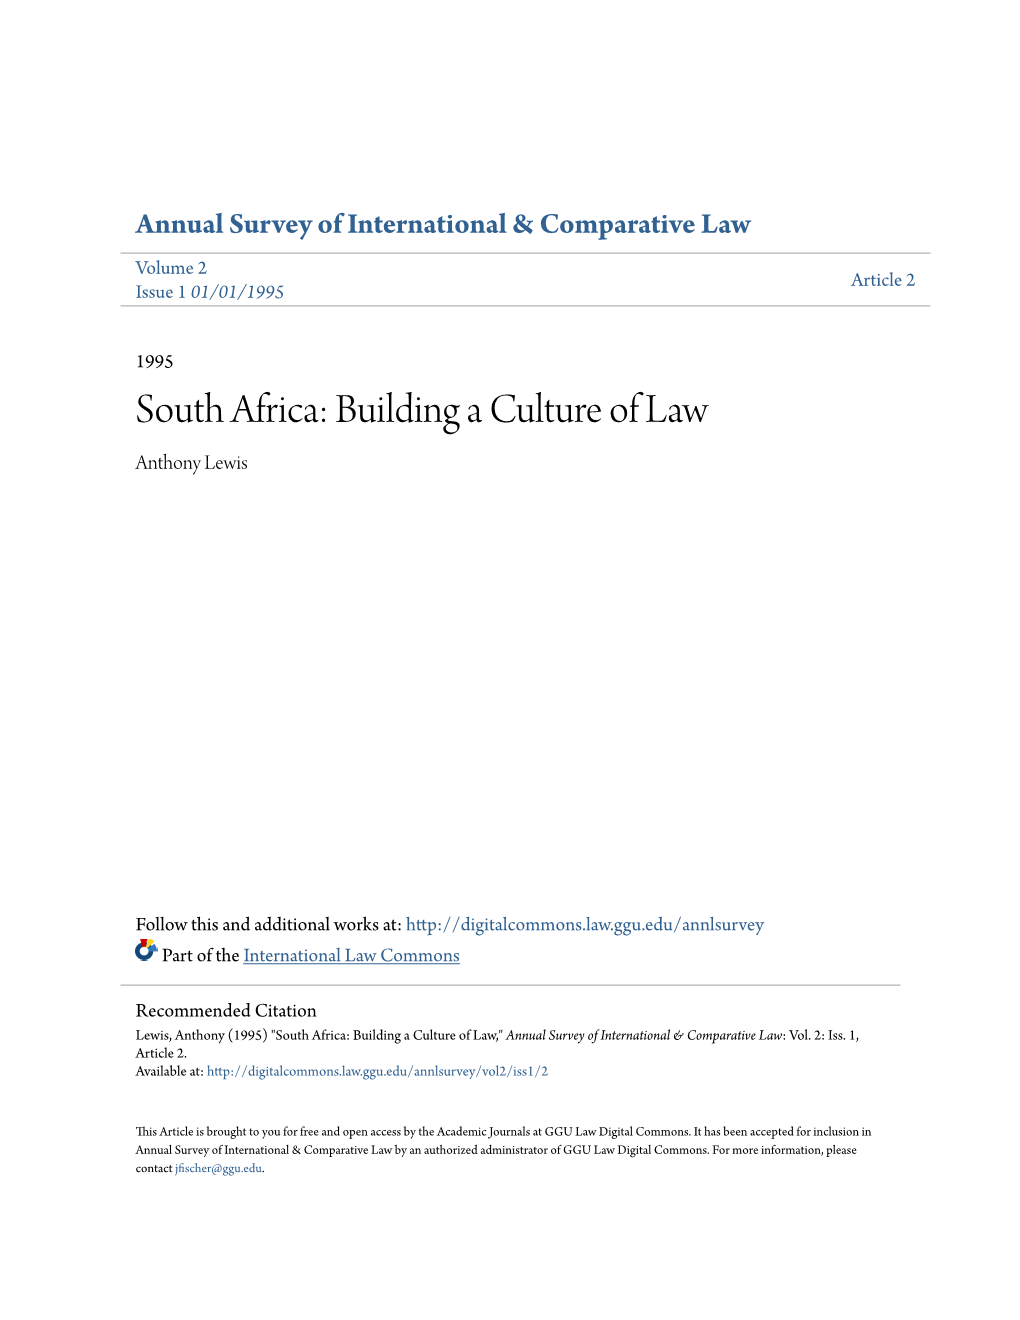 South Africa: Building a Culture of Law Anthony Lewis